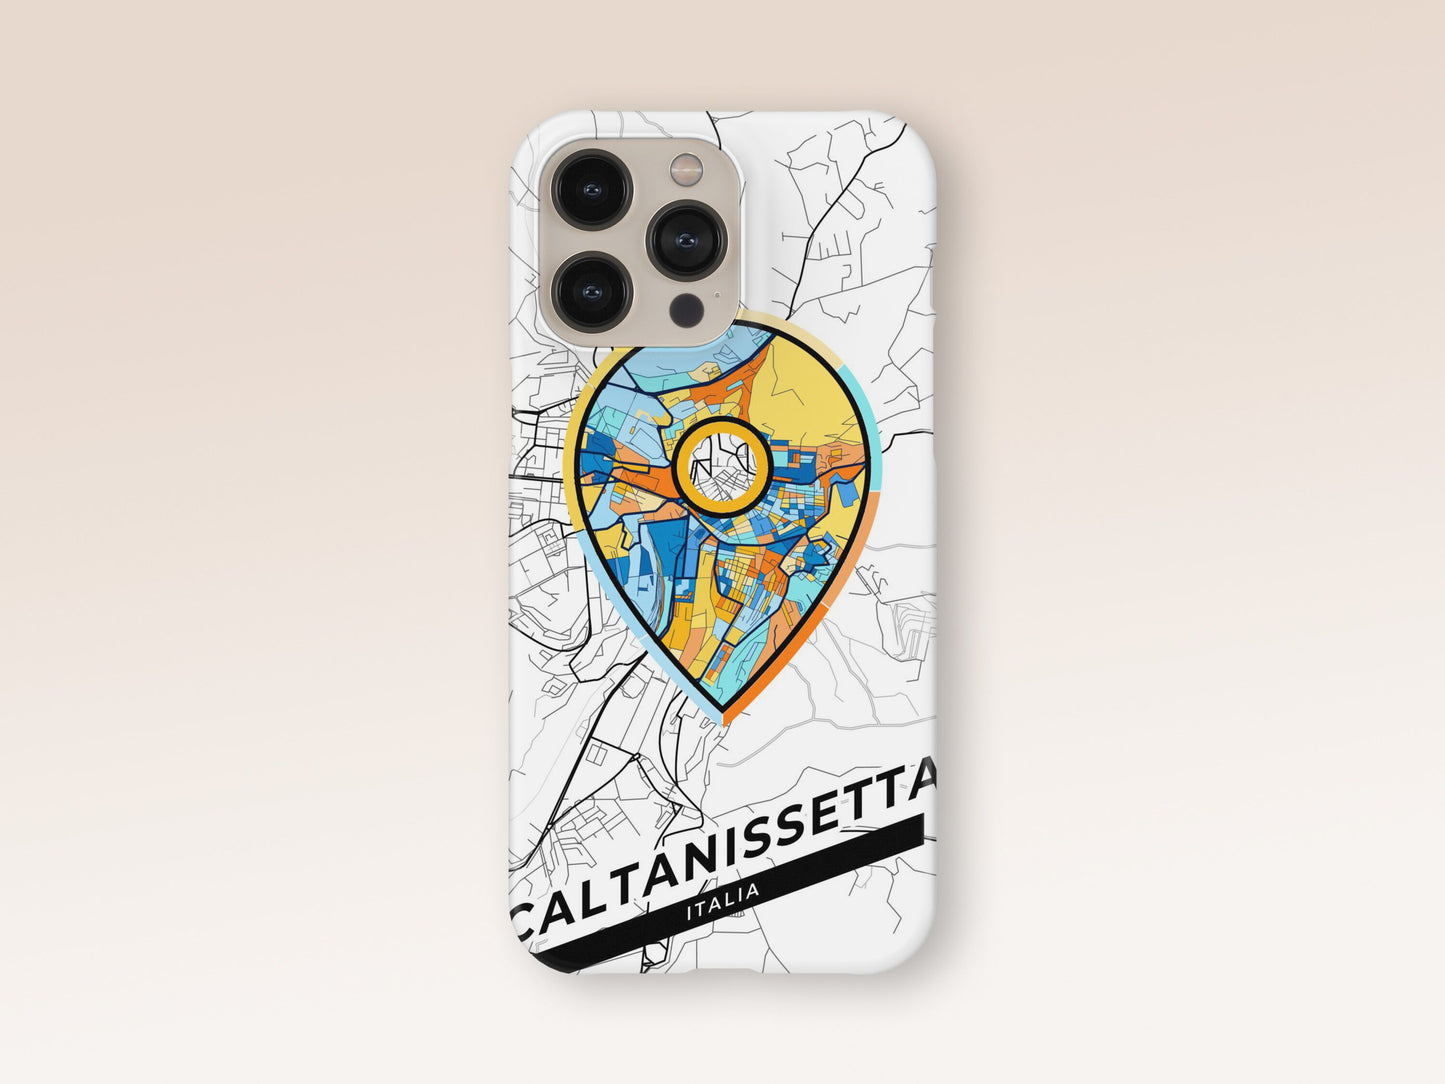 Caltanissetta Italy slim phone case with colorful icon. Birthday, wedding or housewarming gift. Couple match cases. 1